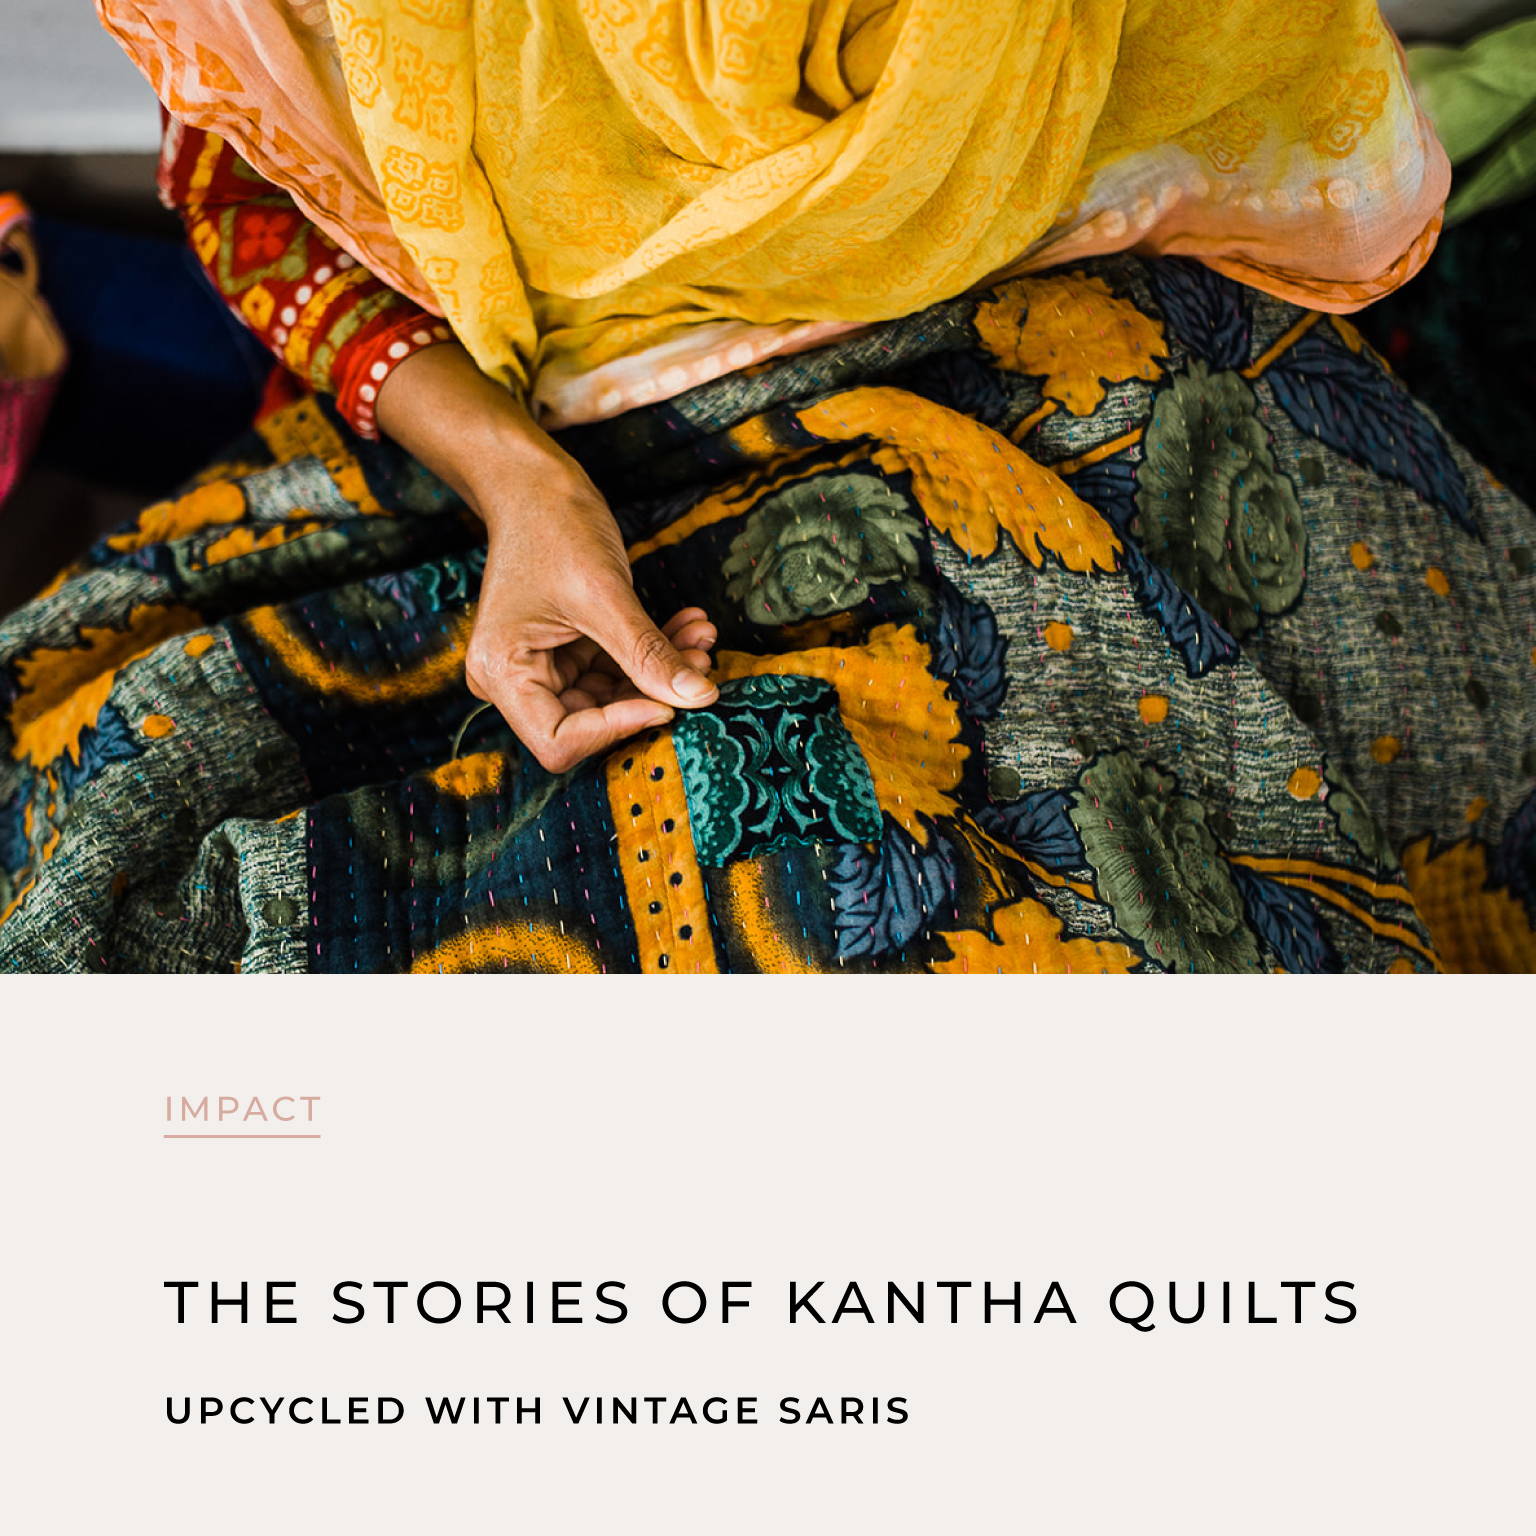 The Story of Kantha Quilts | The Little Market